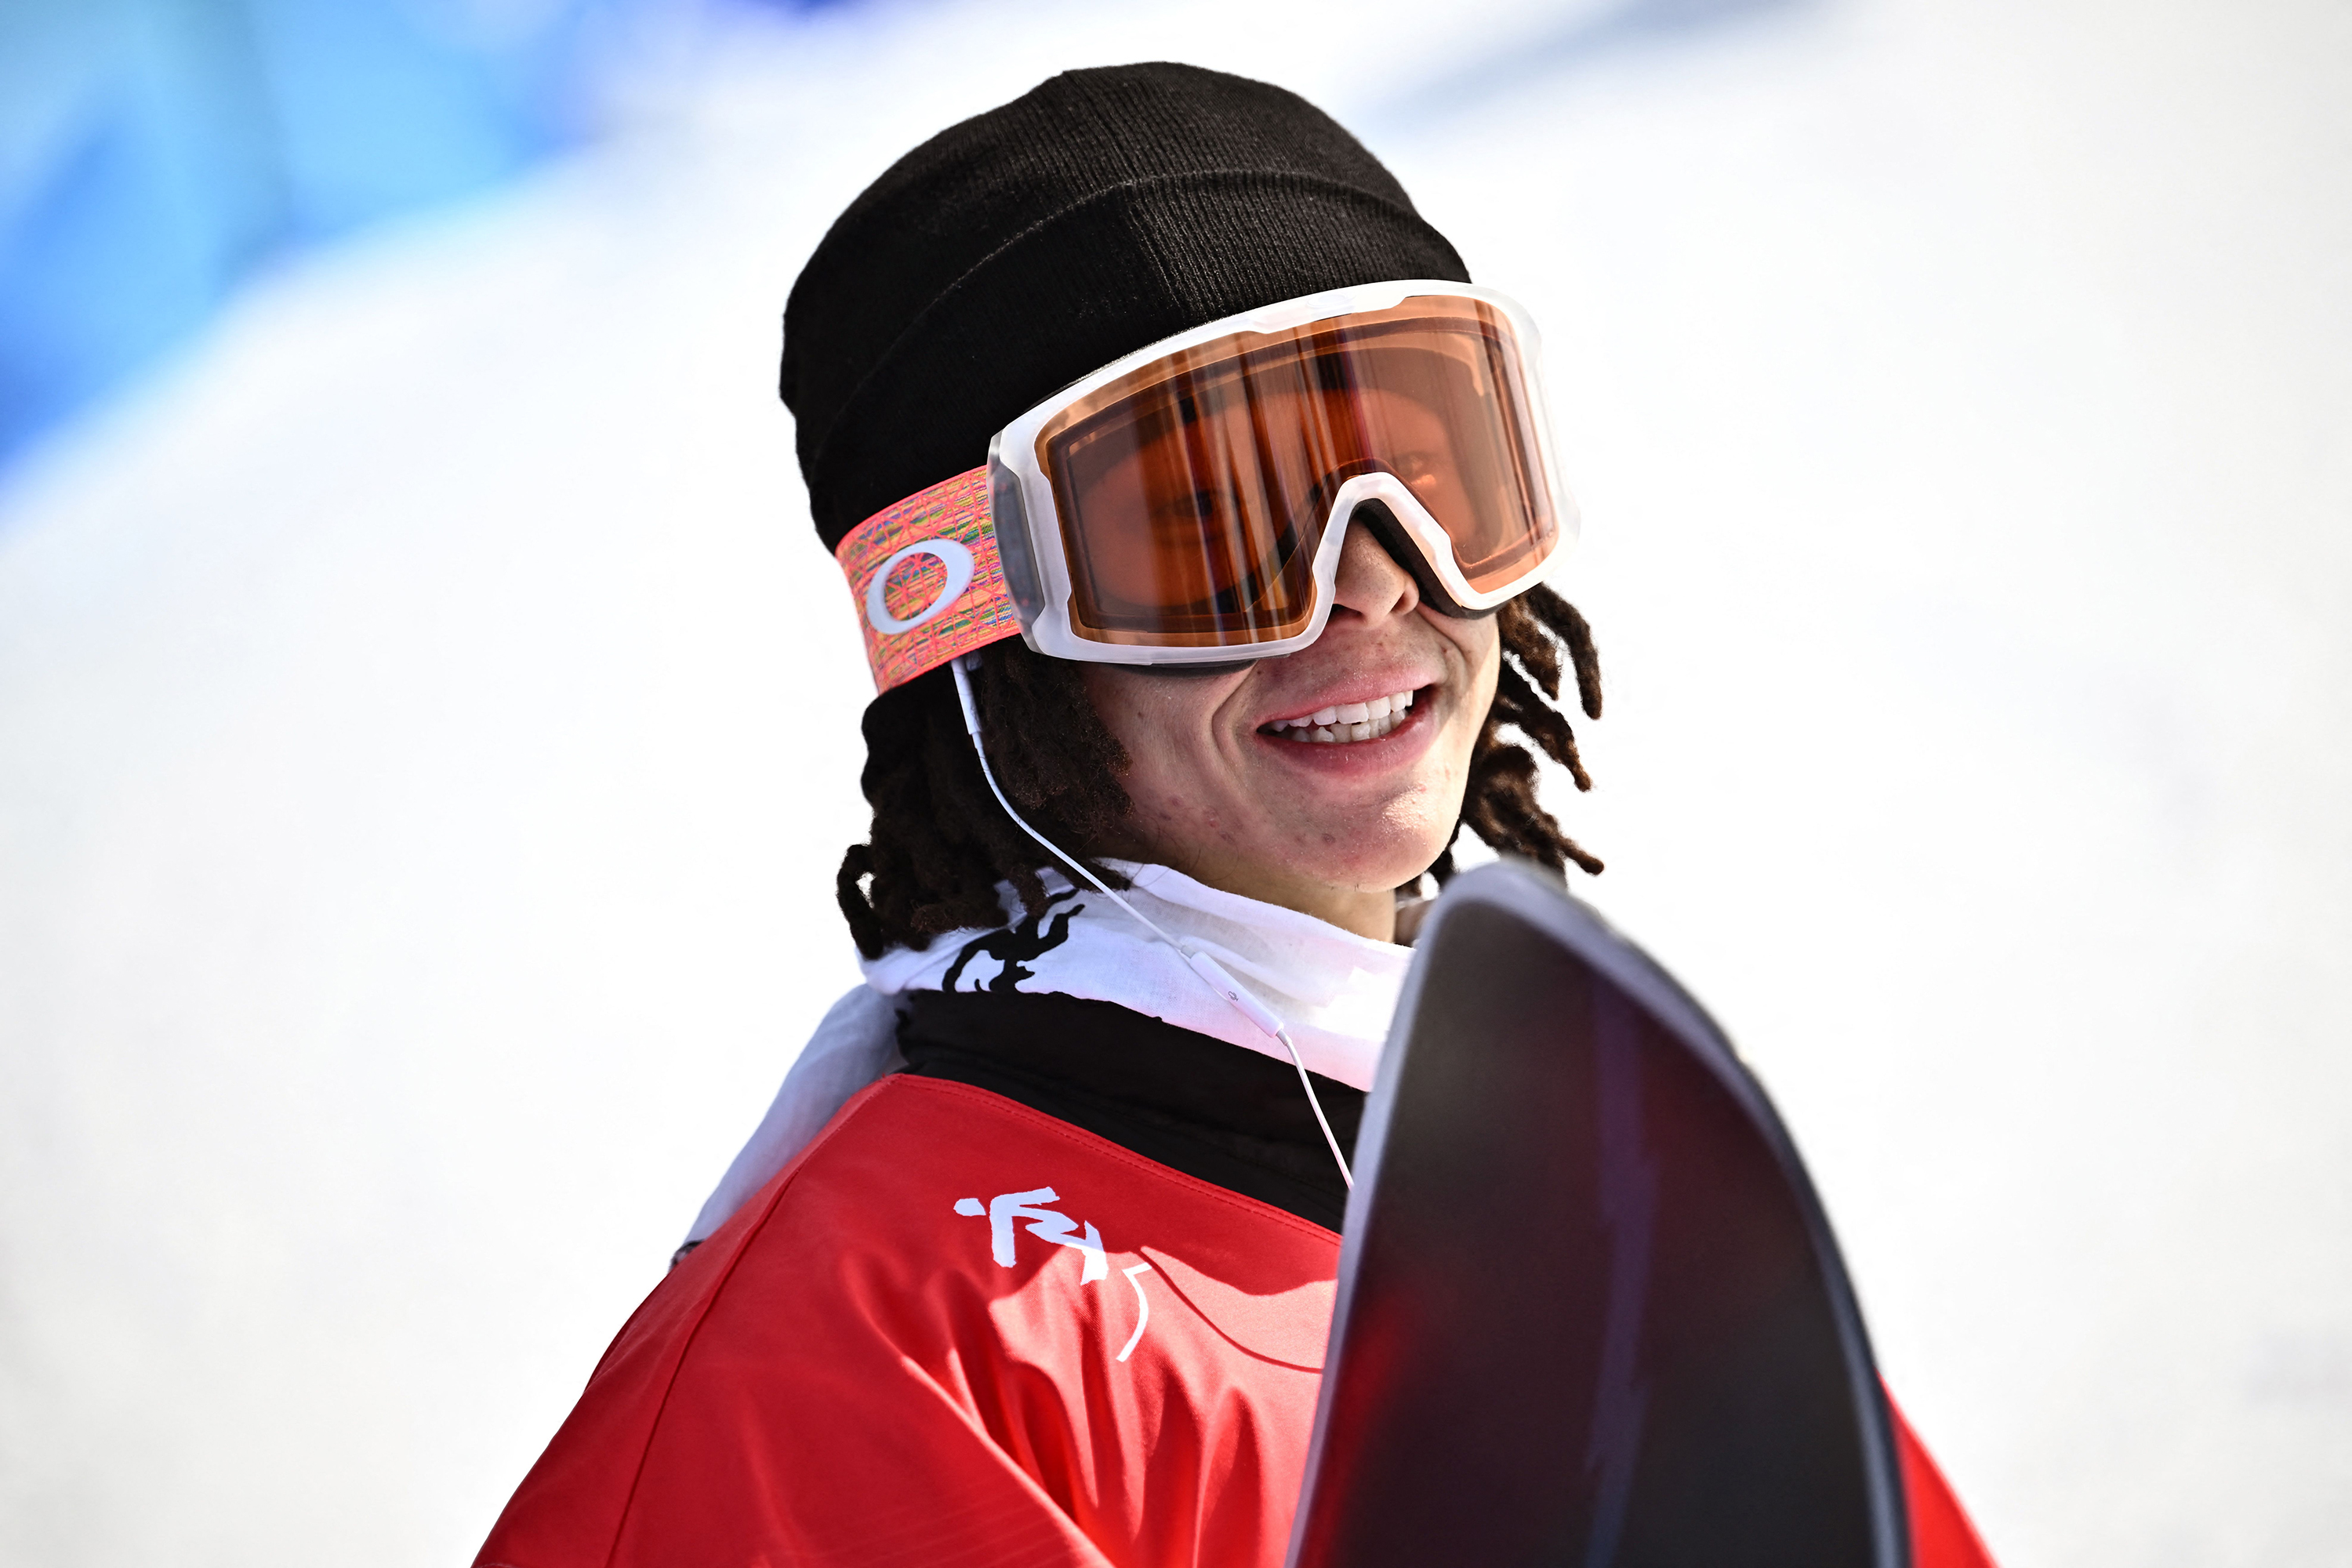 41) Ayumu Hirano lands first ever triple cork in halfpipe history as he takes the gold in an epic final